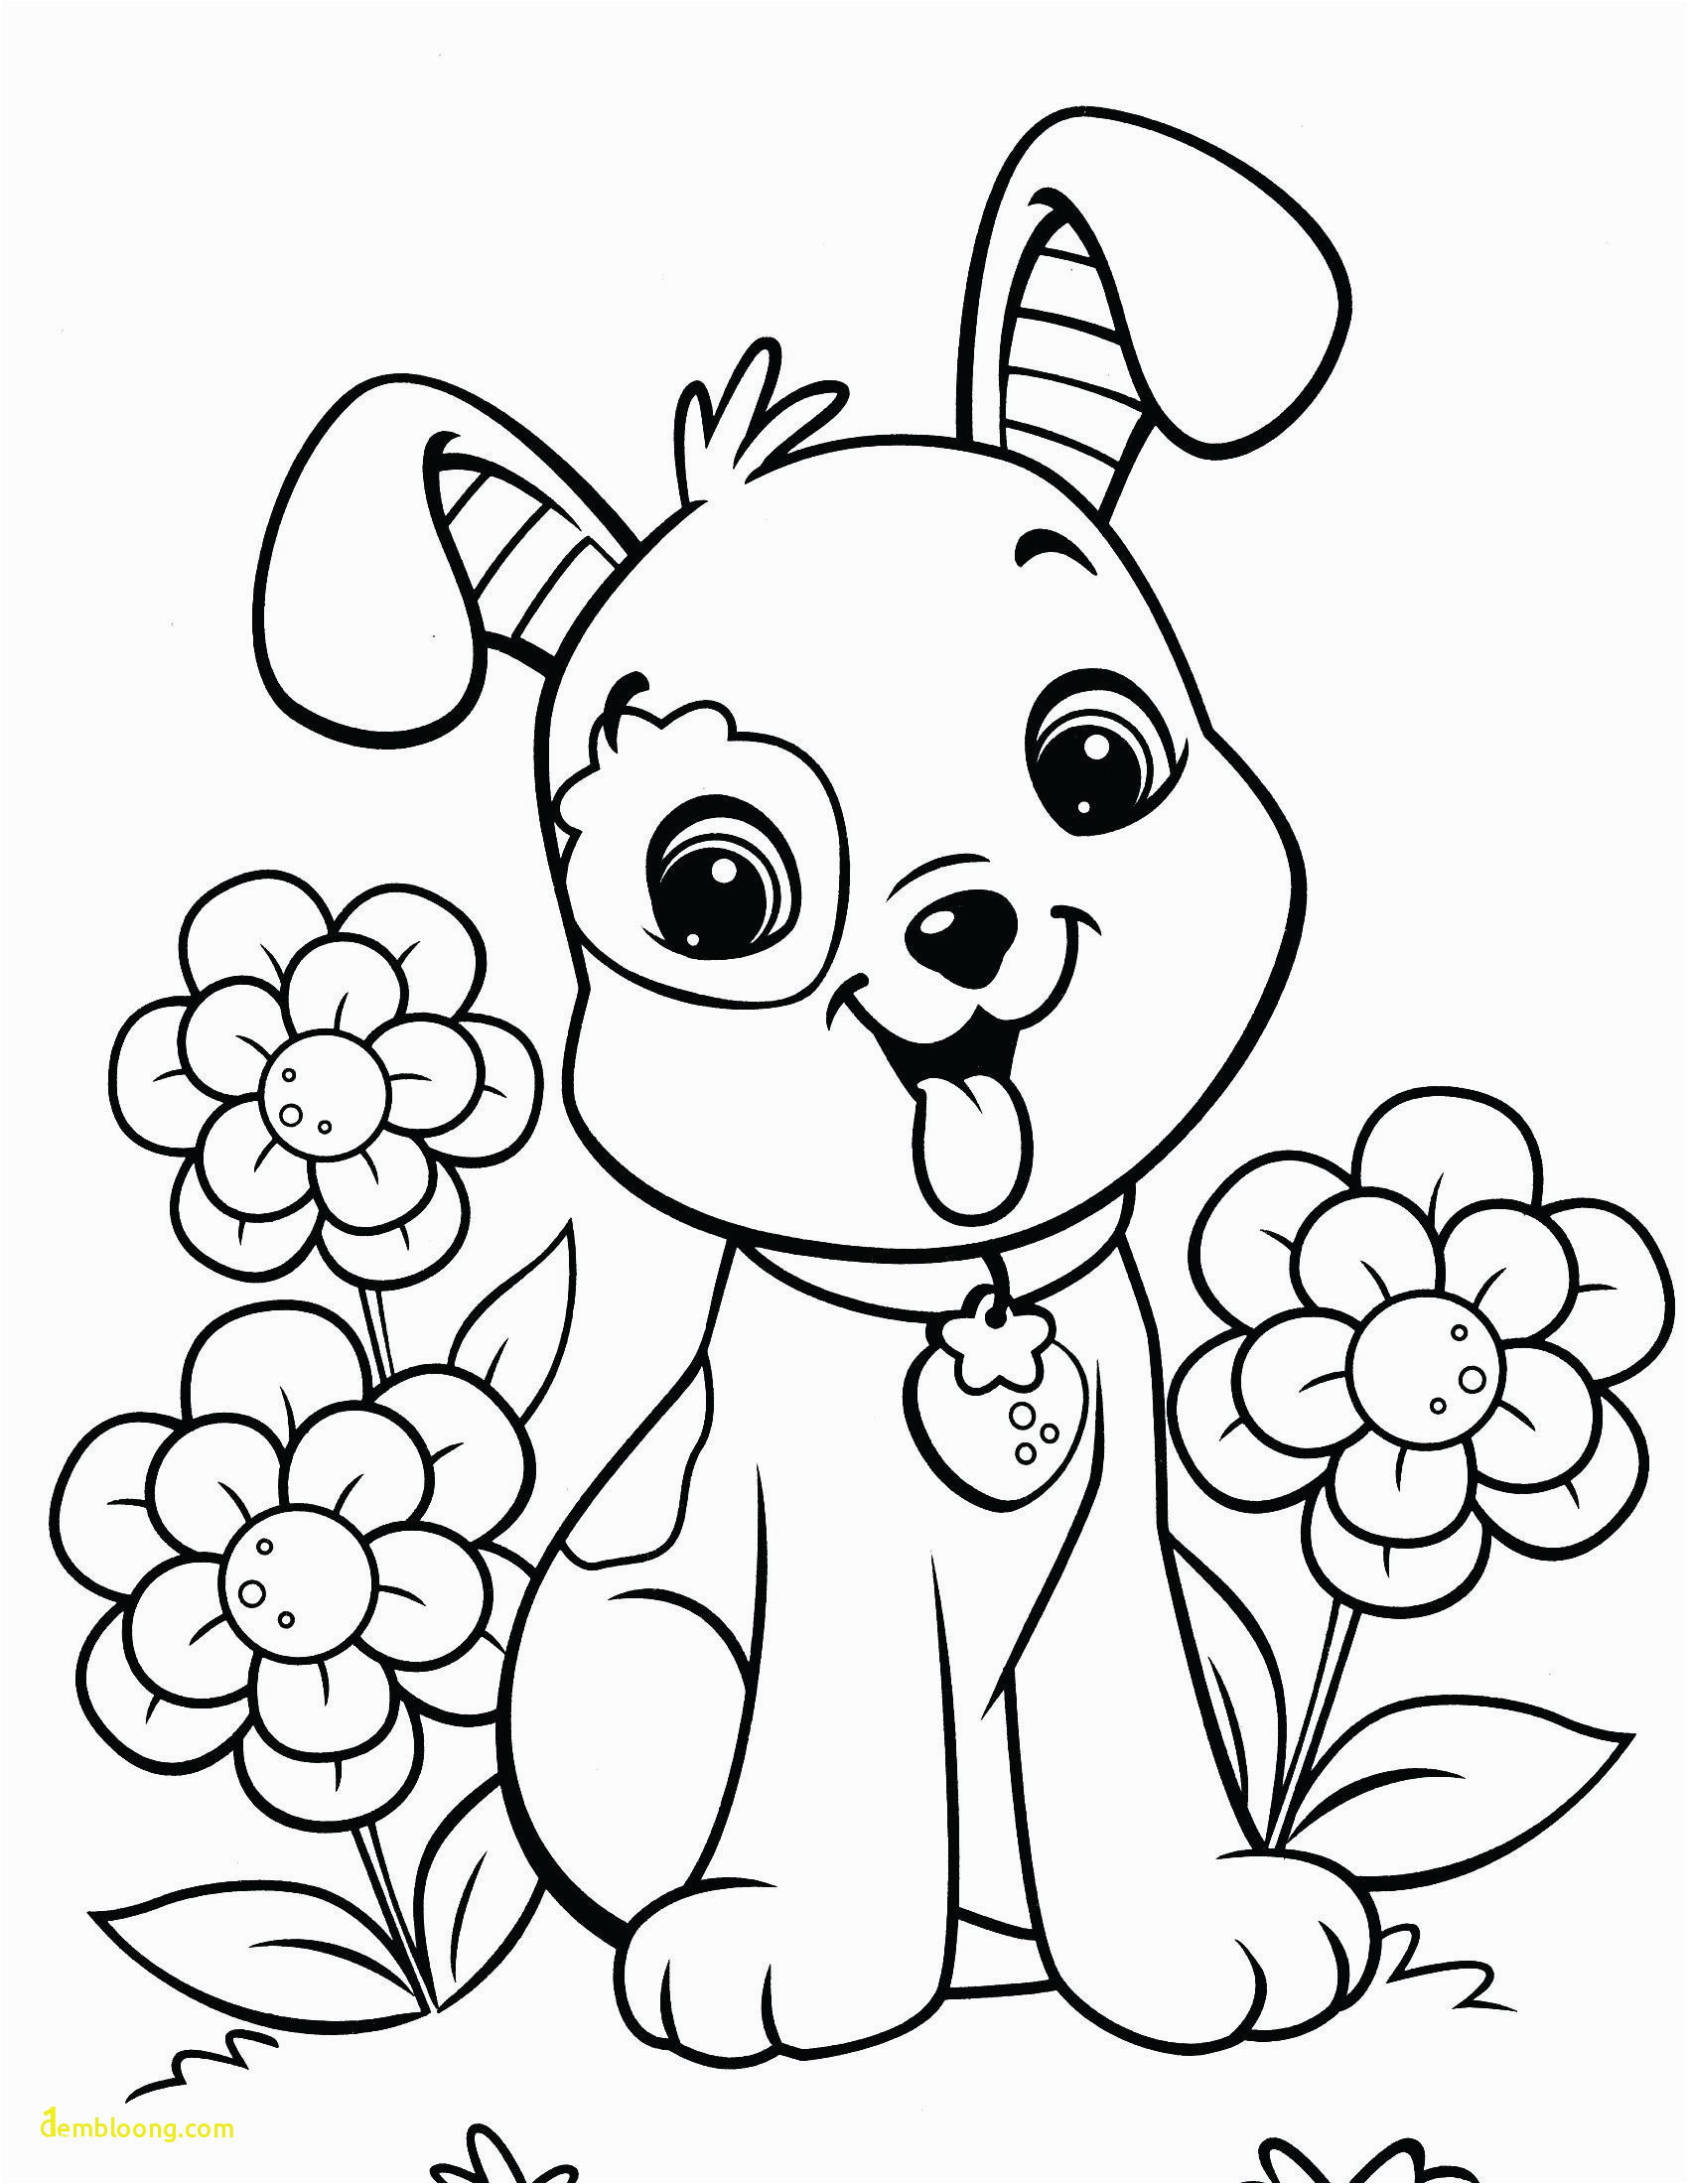 Free Printable Spring Coloring Pages toddler Coloring Pages